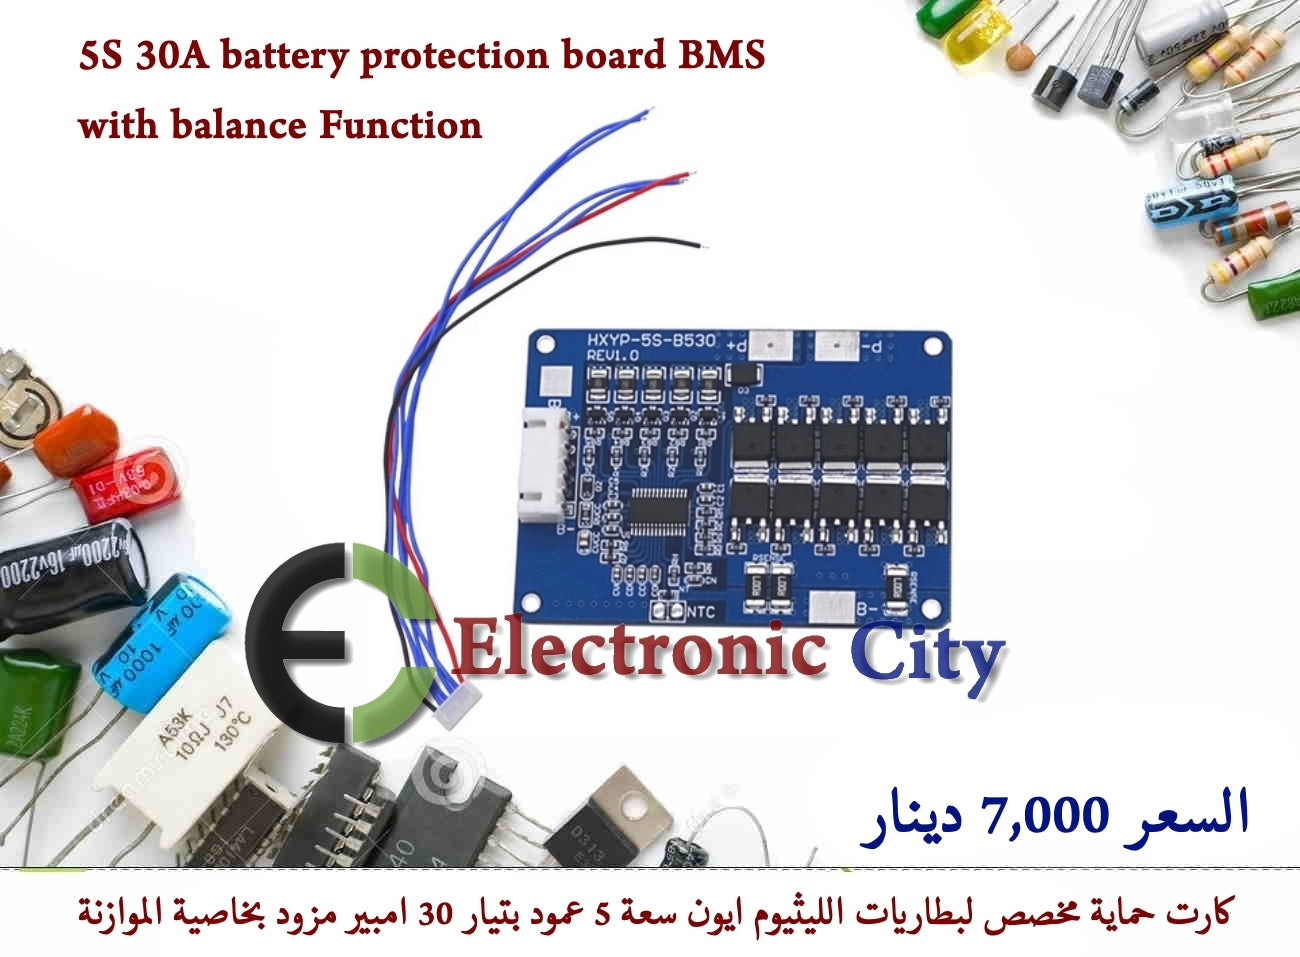 5S 30A battery protection board BMS with balance Function